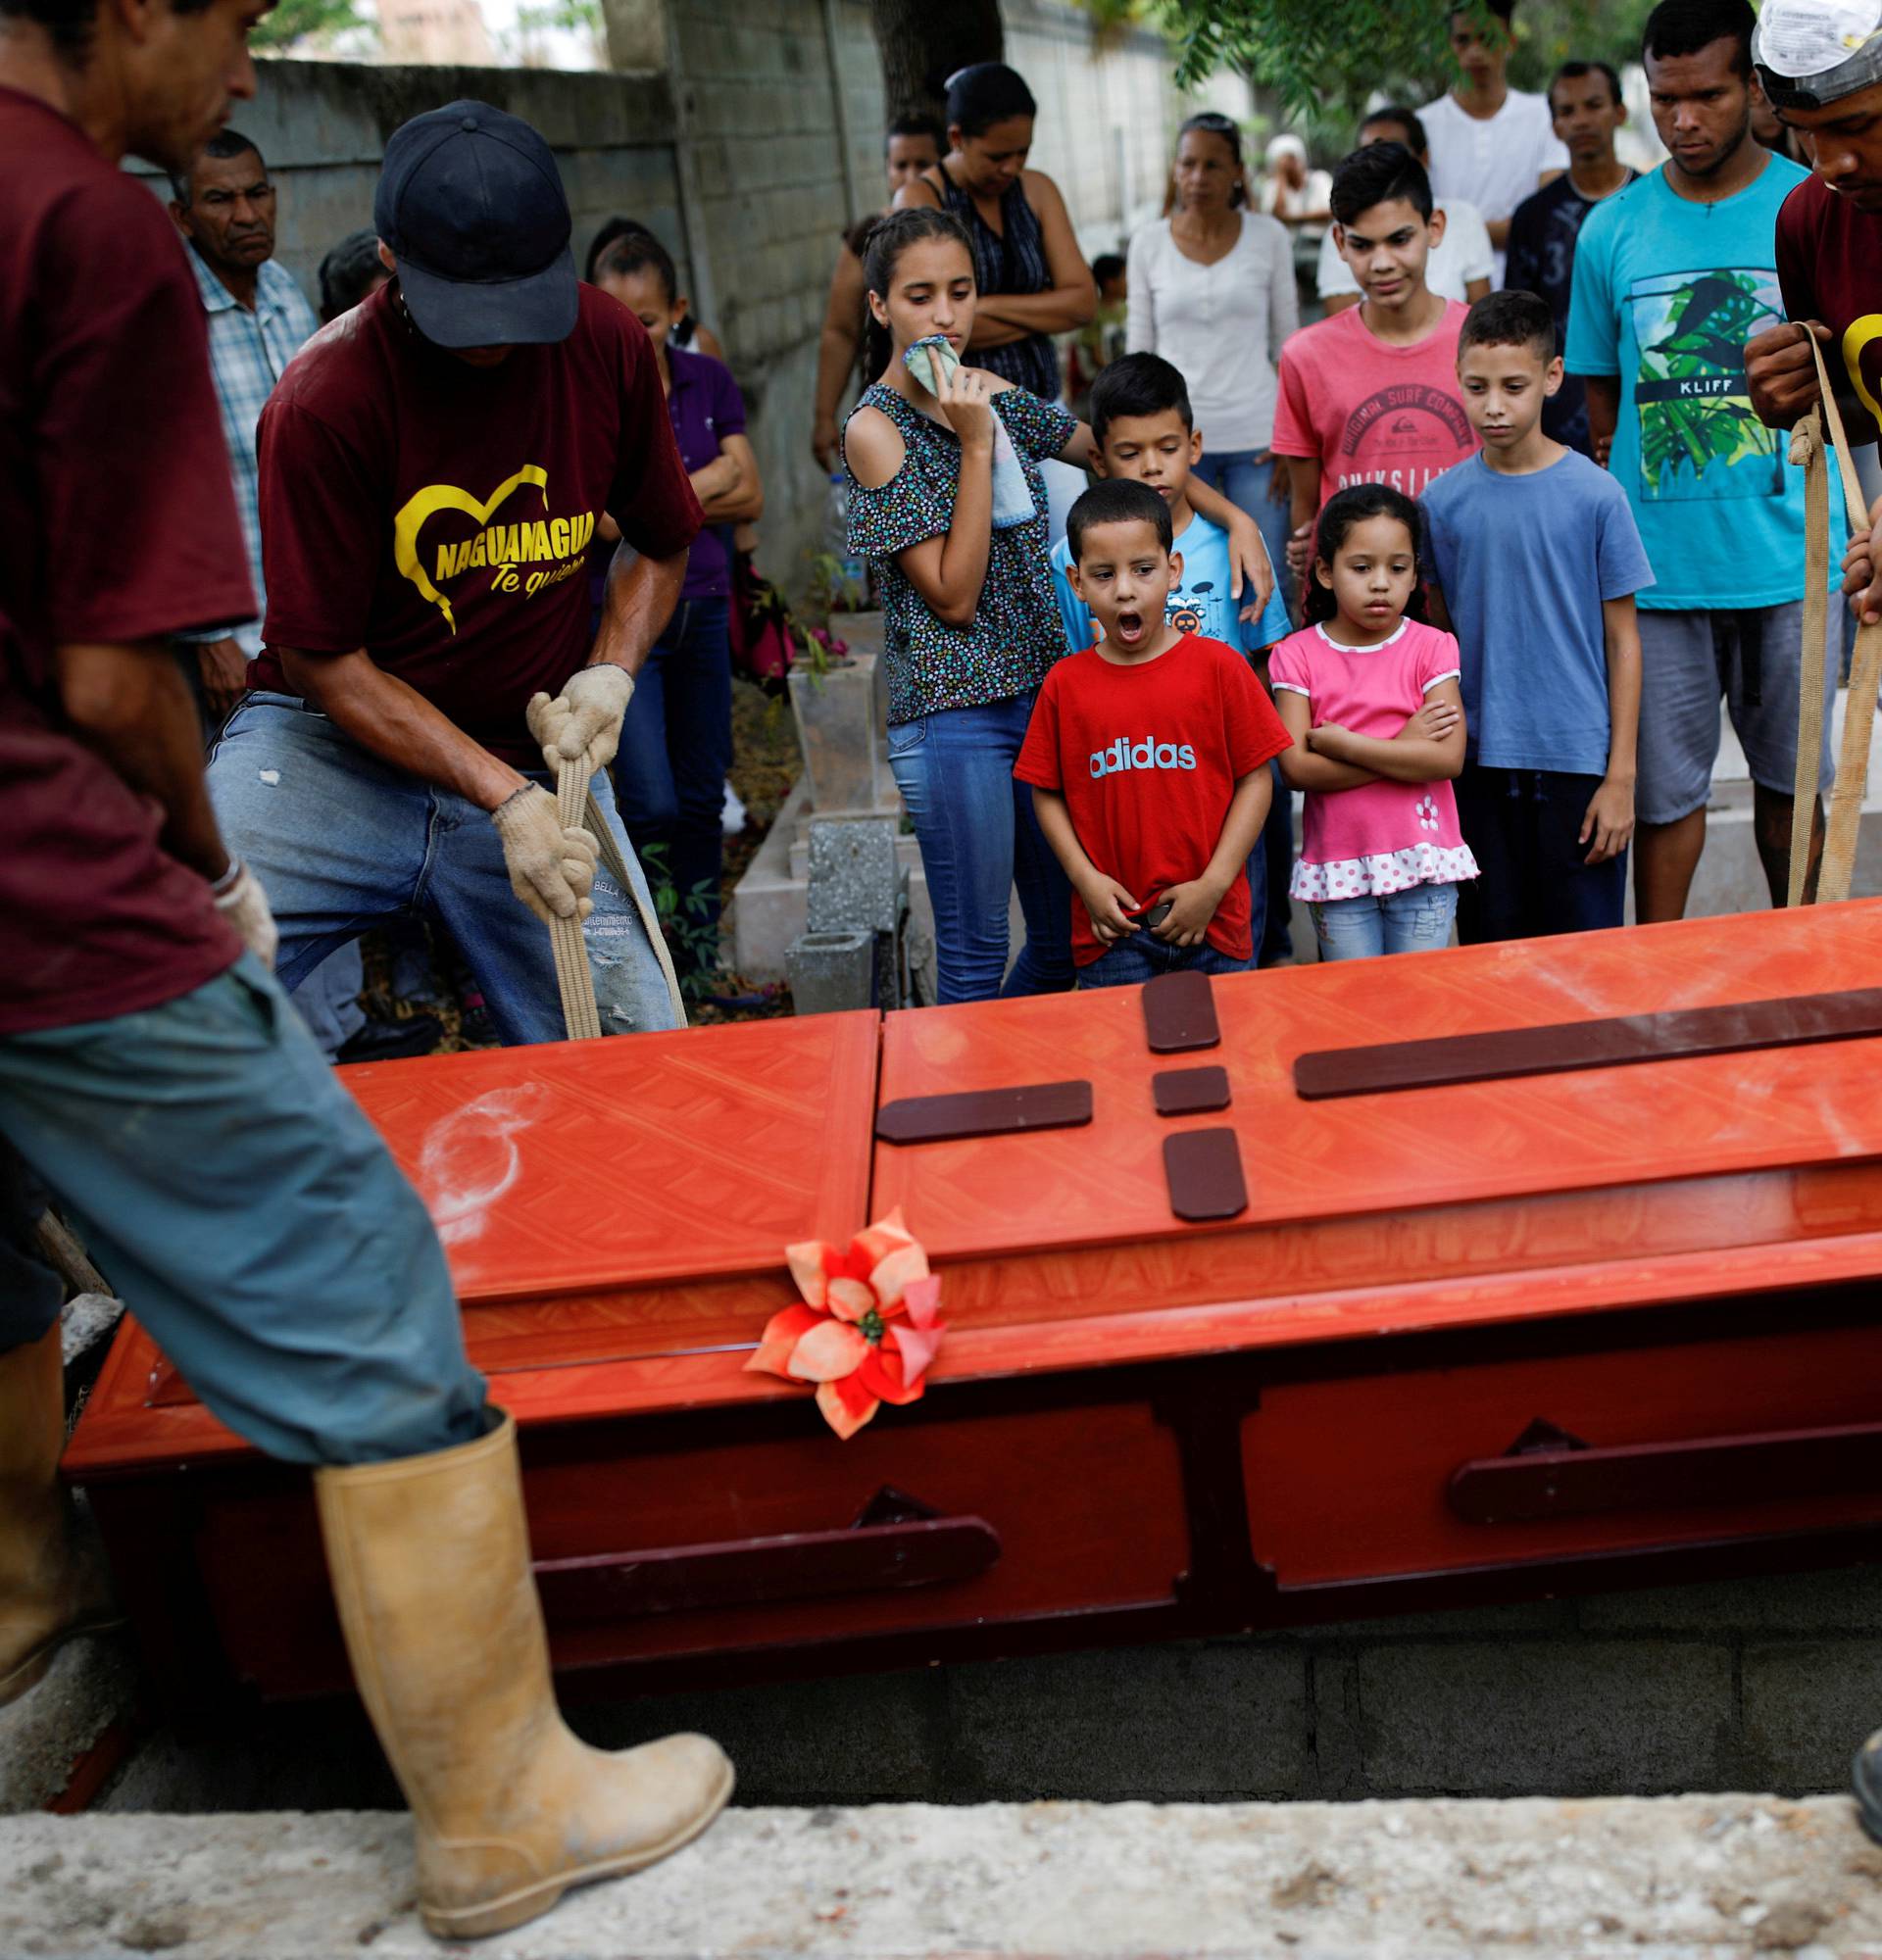 Relatives of Javier Rivas, one of the inmates who died during a riot and fire in the cells of the General Command of the Carabobo Police, react in front of his coffin during his funeral in Valencia